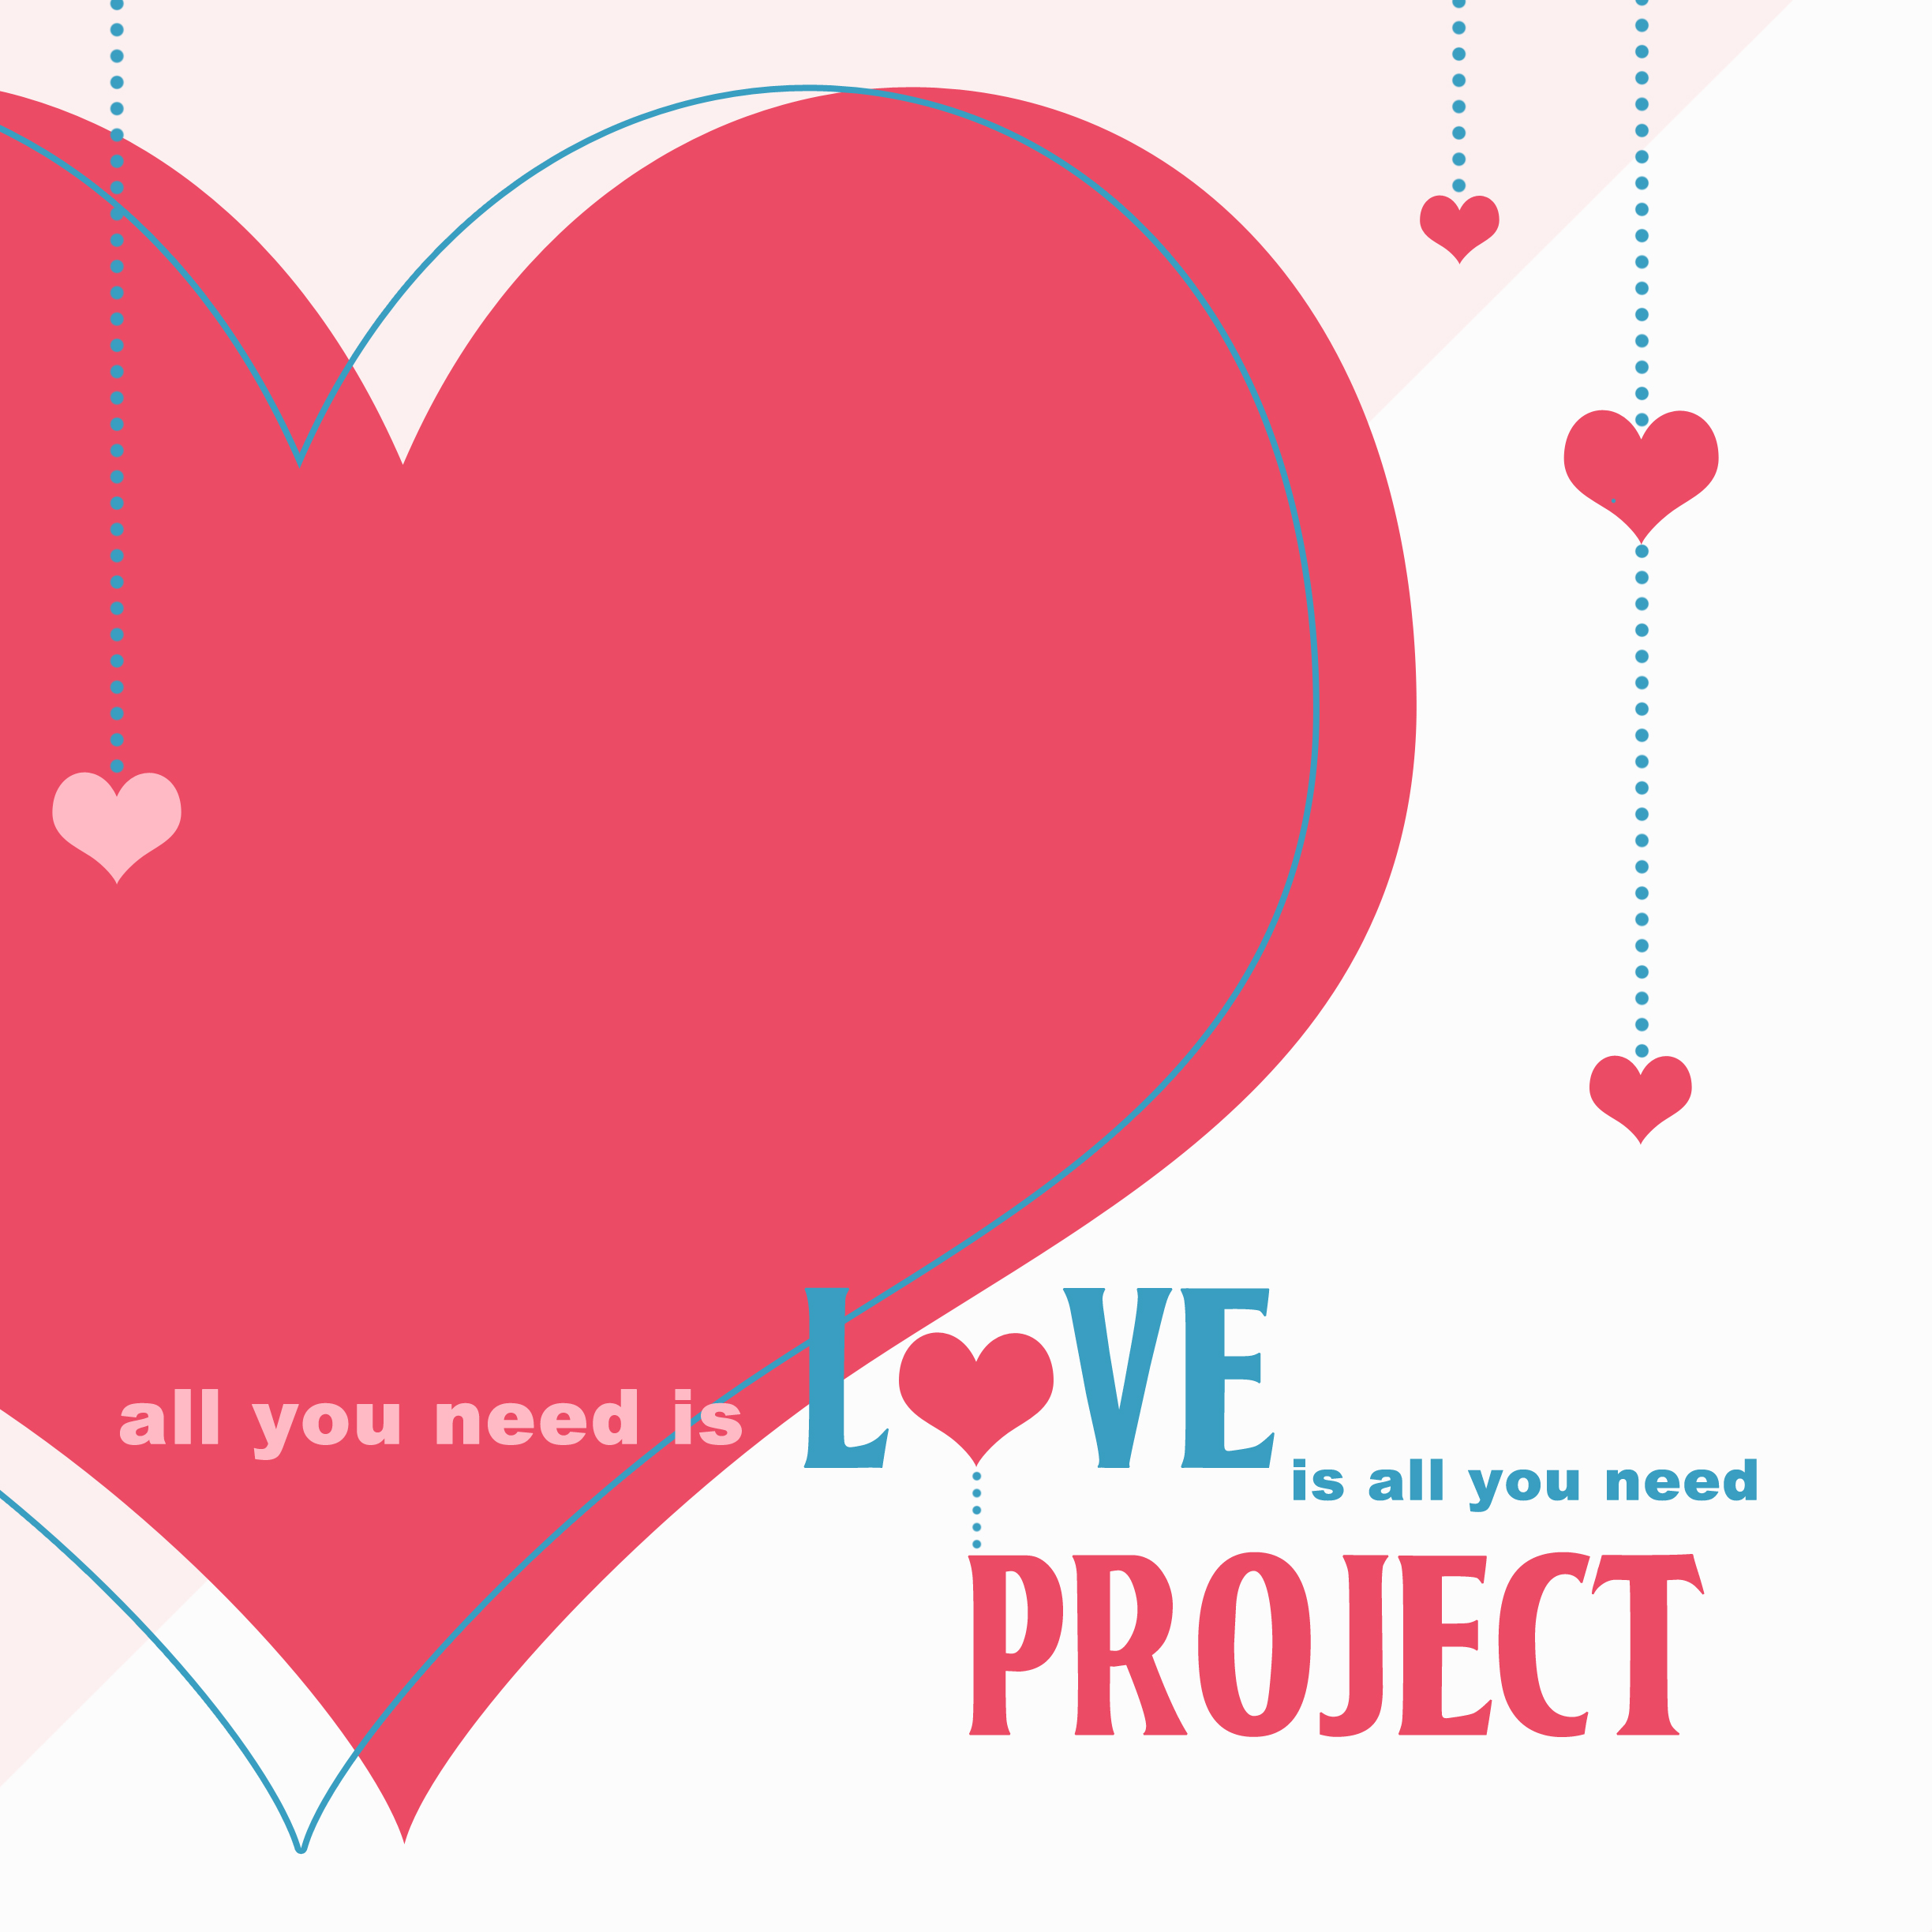 Find Your All You Need is Love Project Over There!